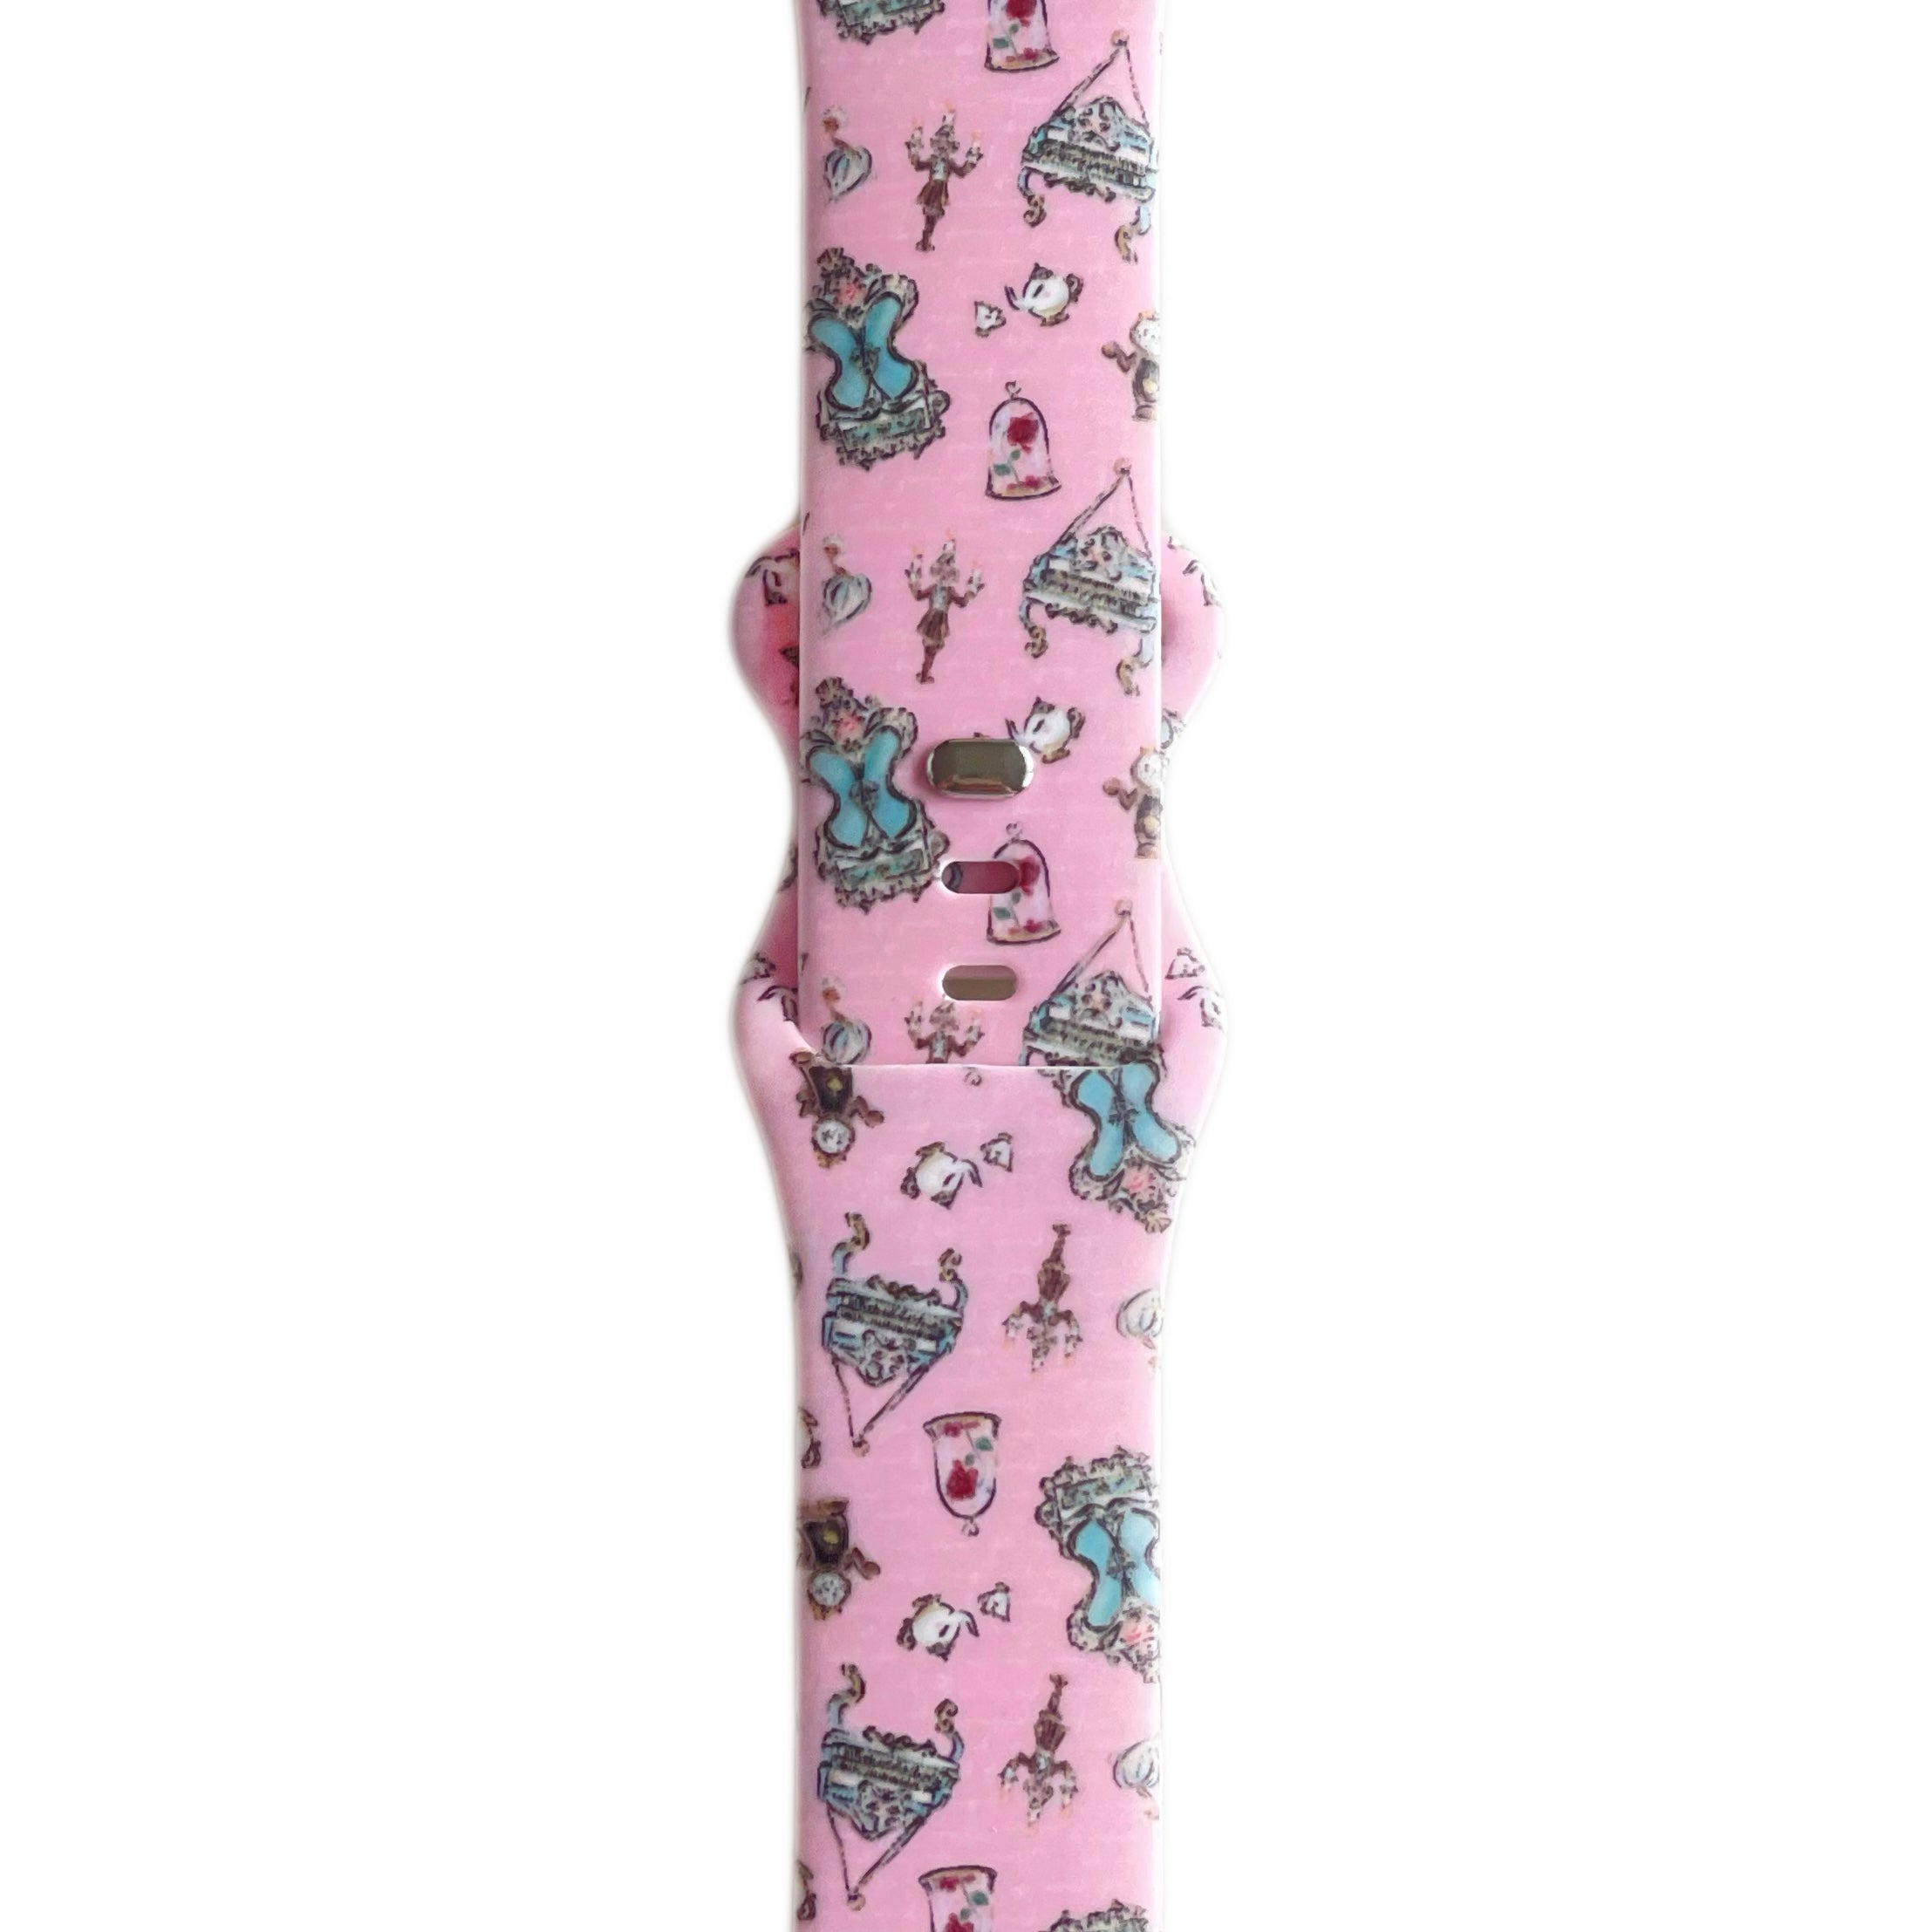 Apple Watch Band Pink Beauty - For Apple Watch Ultra and Series 1, 2, 3, 4, 5, 6, 7 & 8